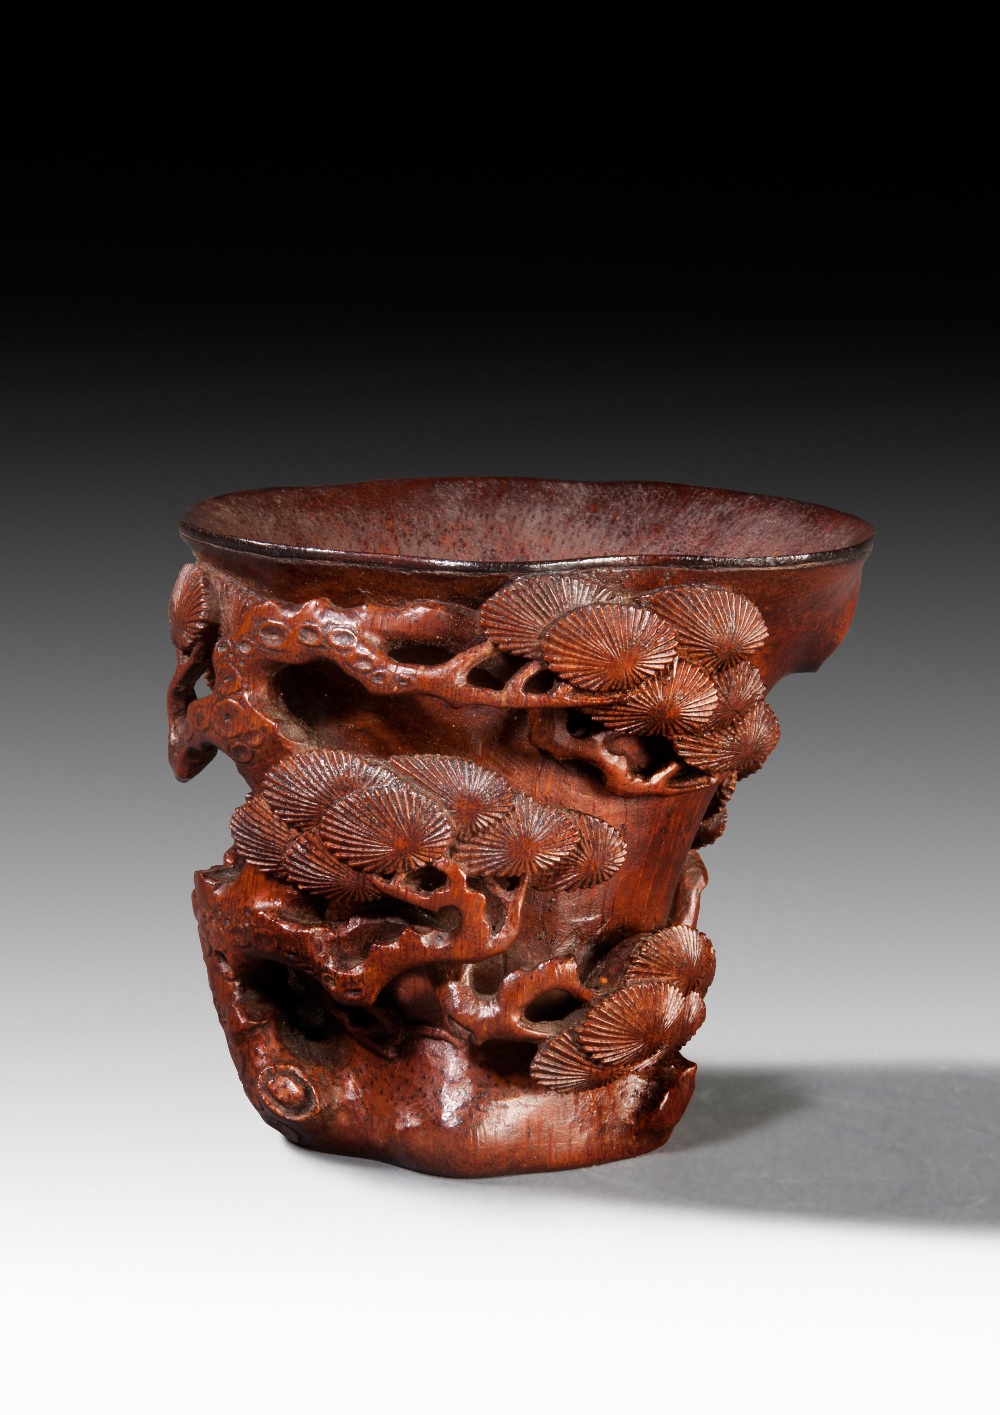 A RARE BAMBOO LIBATION CUP, 17TH - 18TH CENTURY. W: 11.1 cm.
Flaring towards the mouth and of